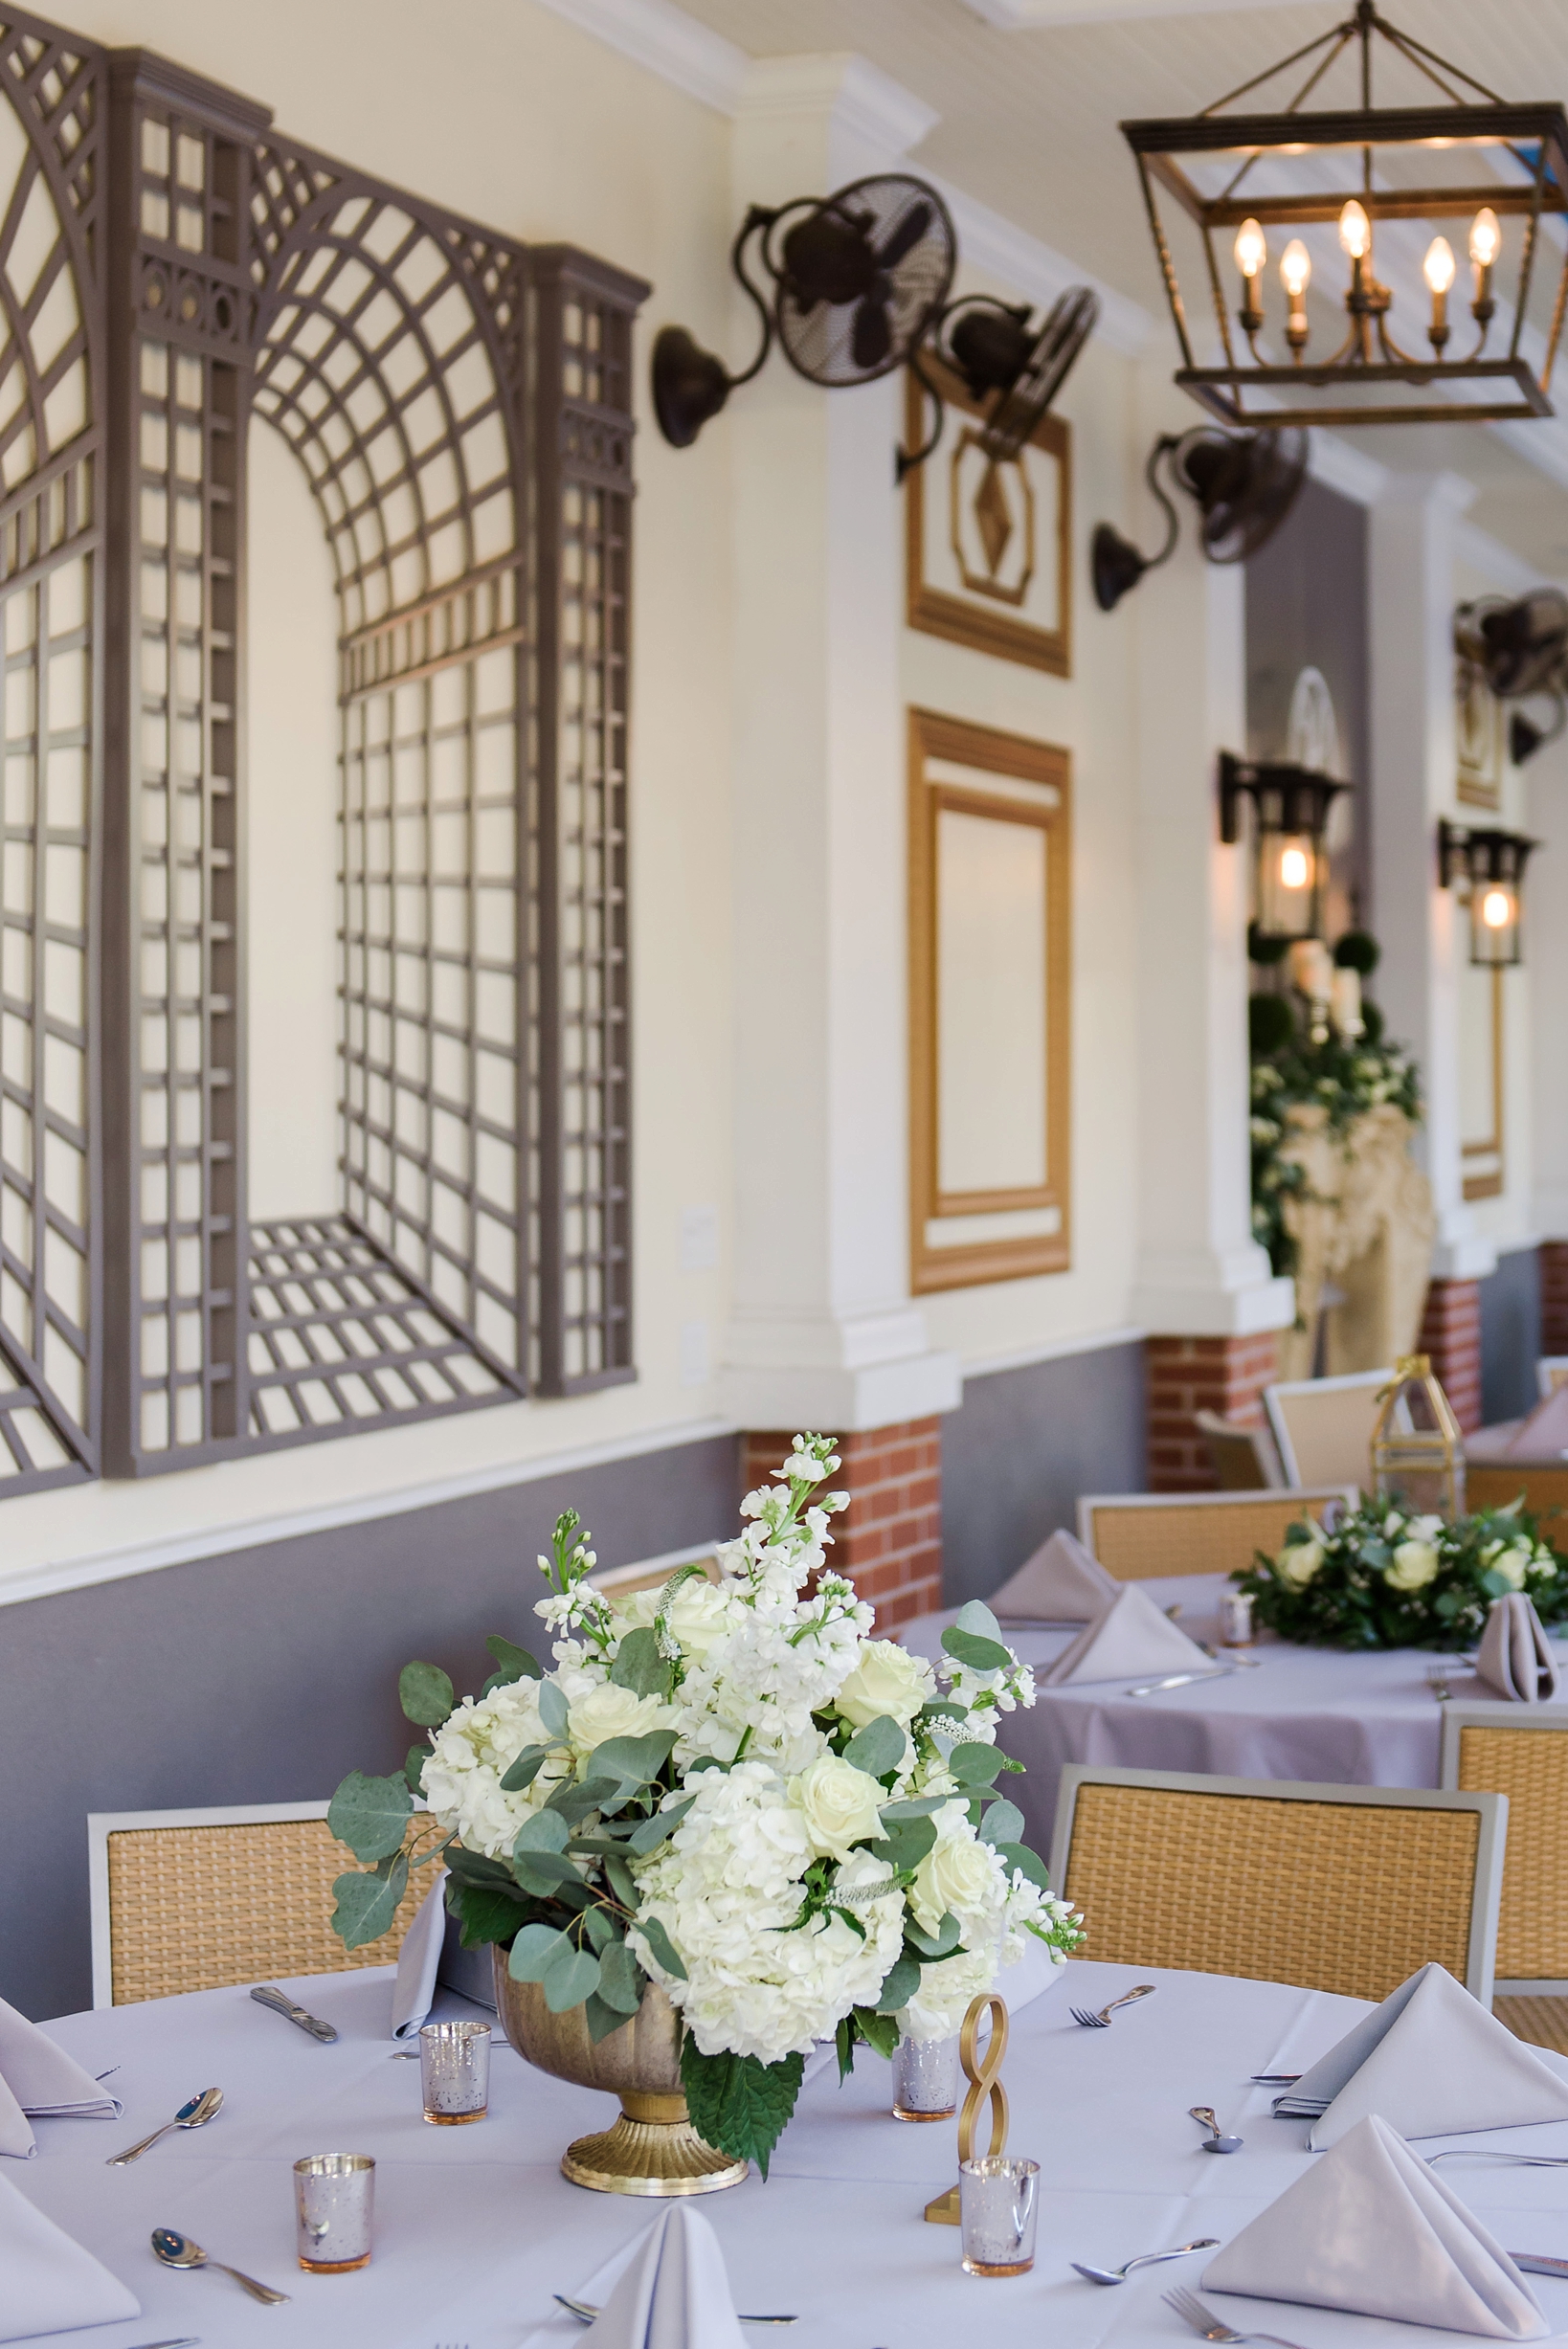 Reception decor including florals and 3D wall patterns